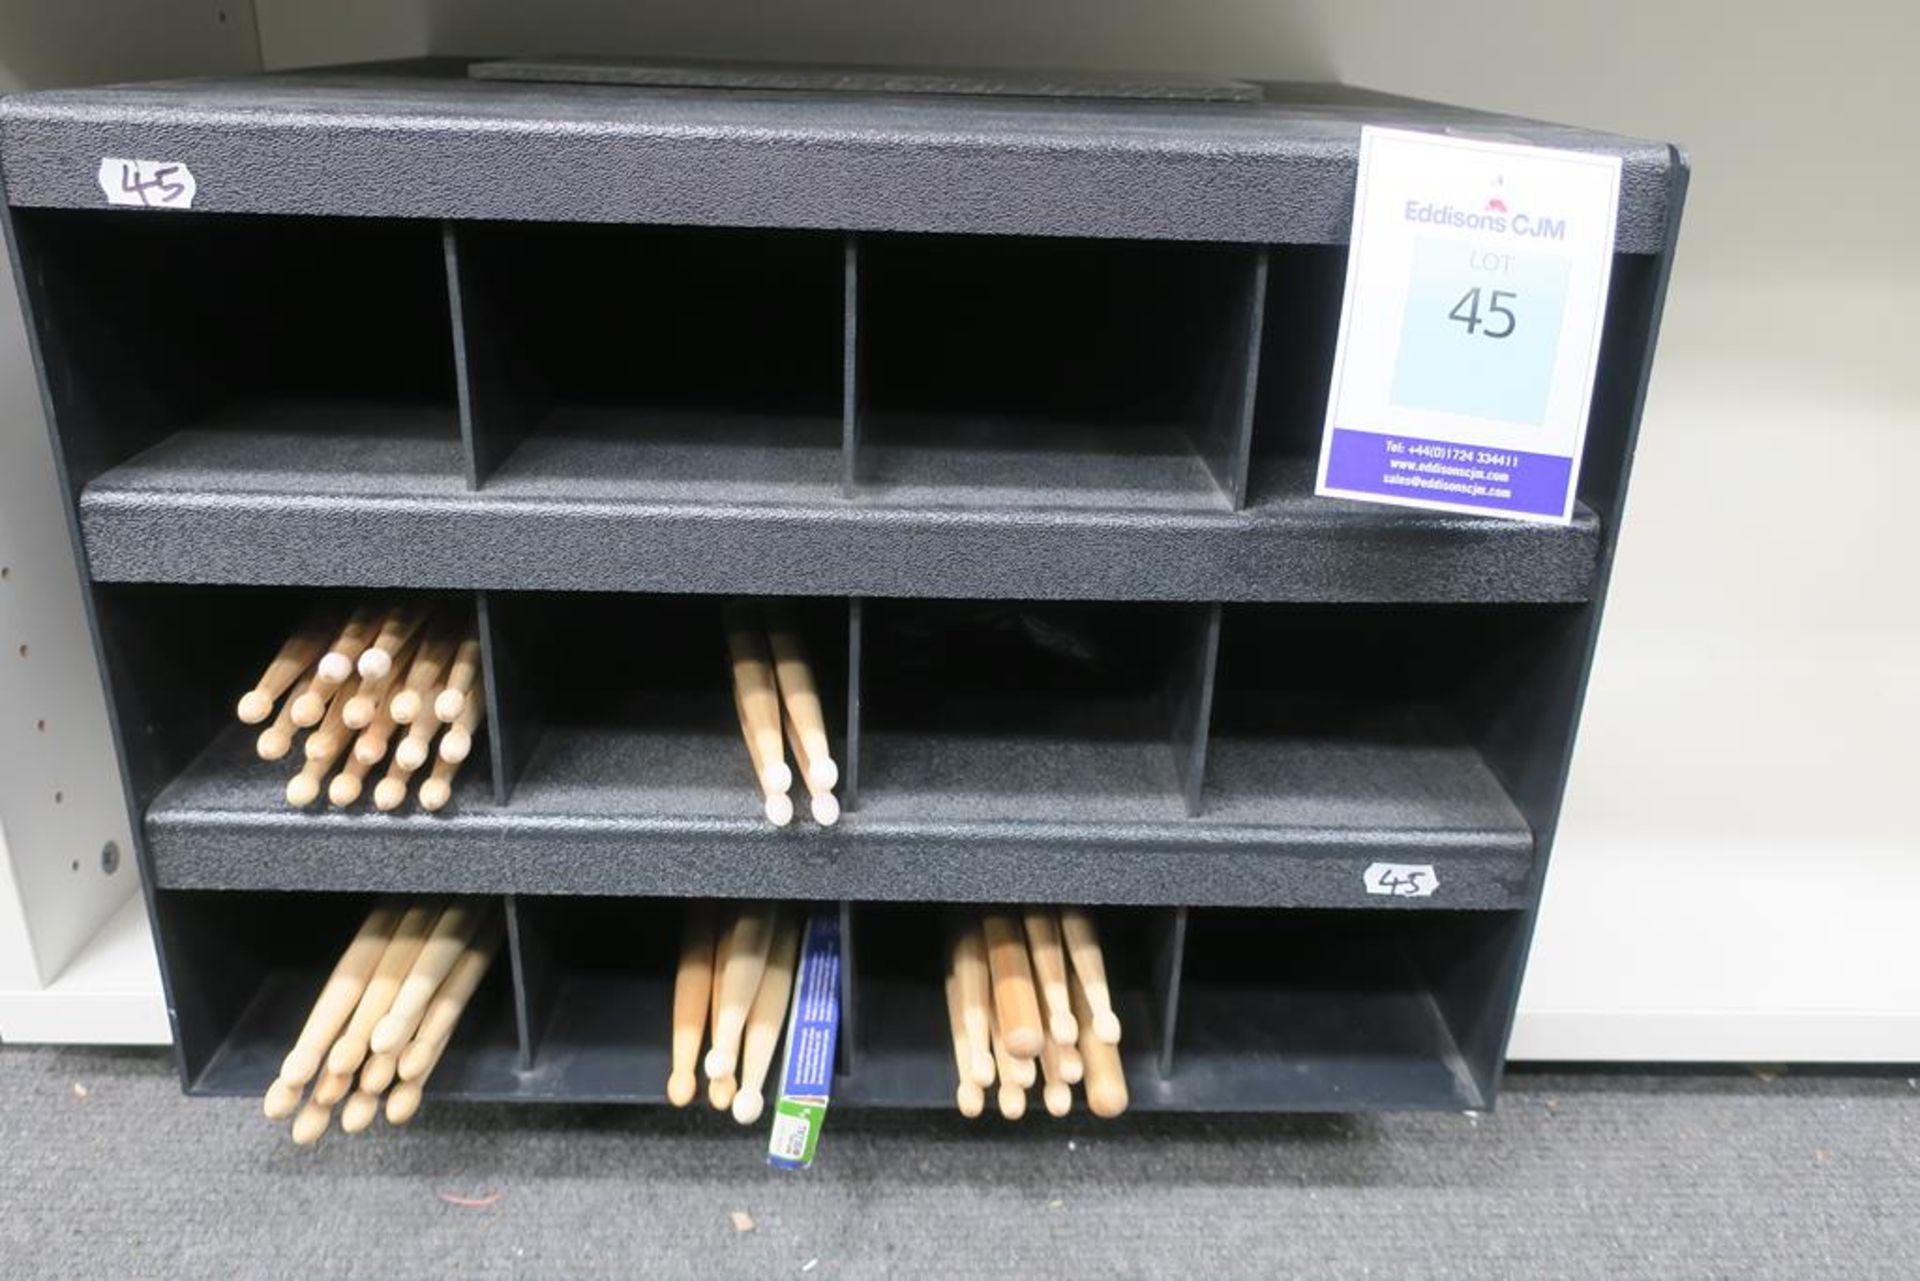 A quantity of Drum Sticks with Display